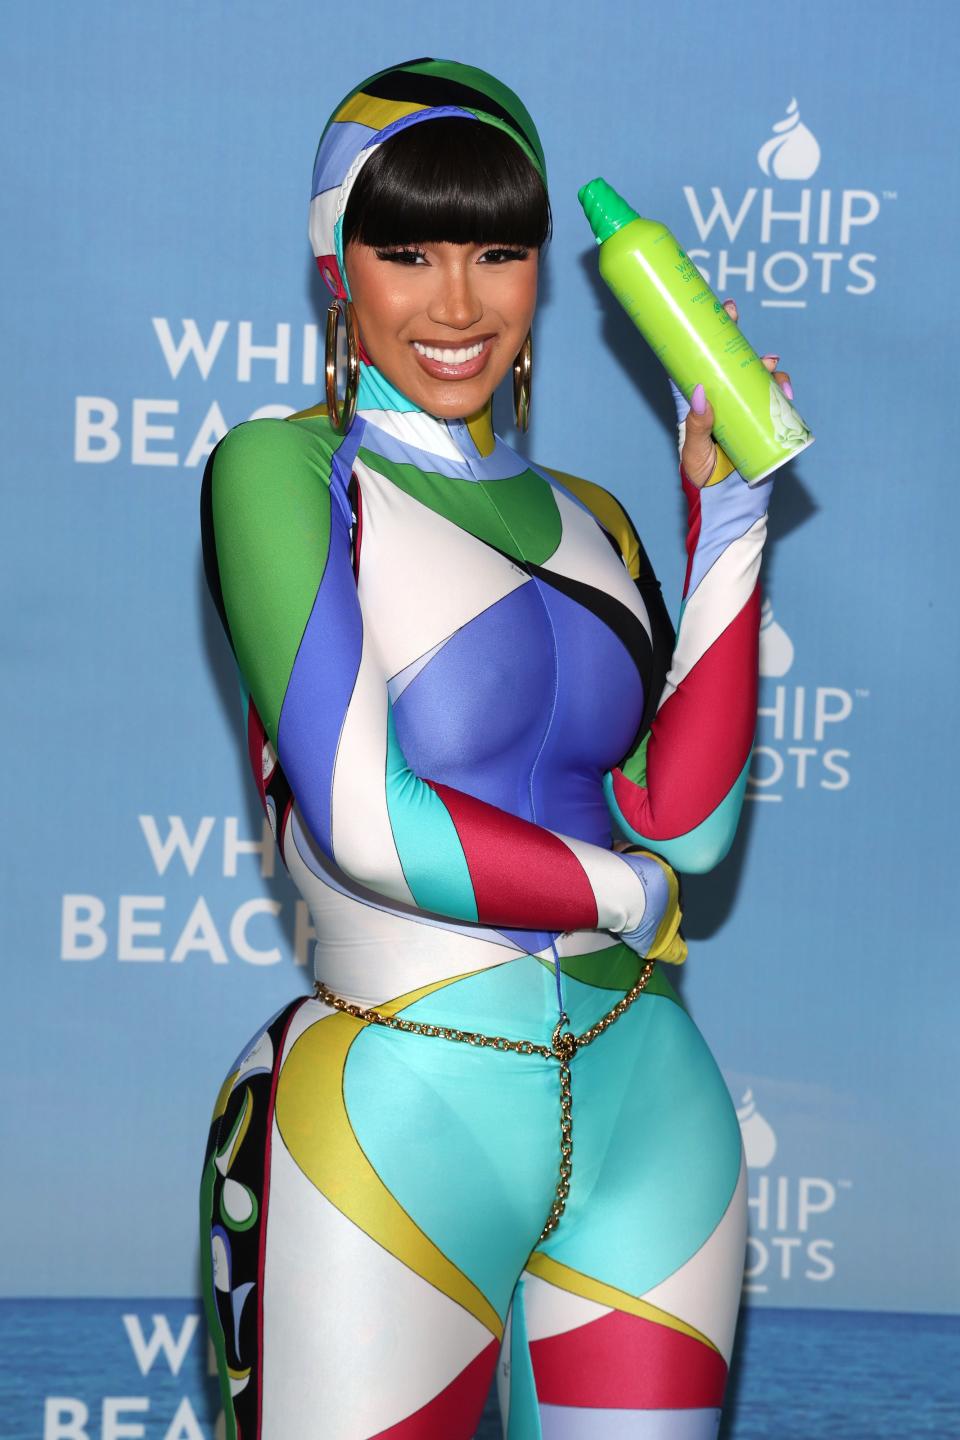 <h1 class="title">Whipshots Presents Summer Cocktails With Cardi</h1><cite class="credit">Getty Images</cite>